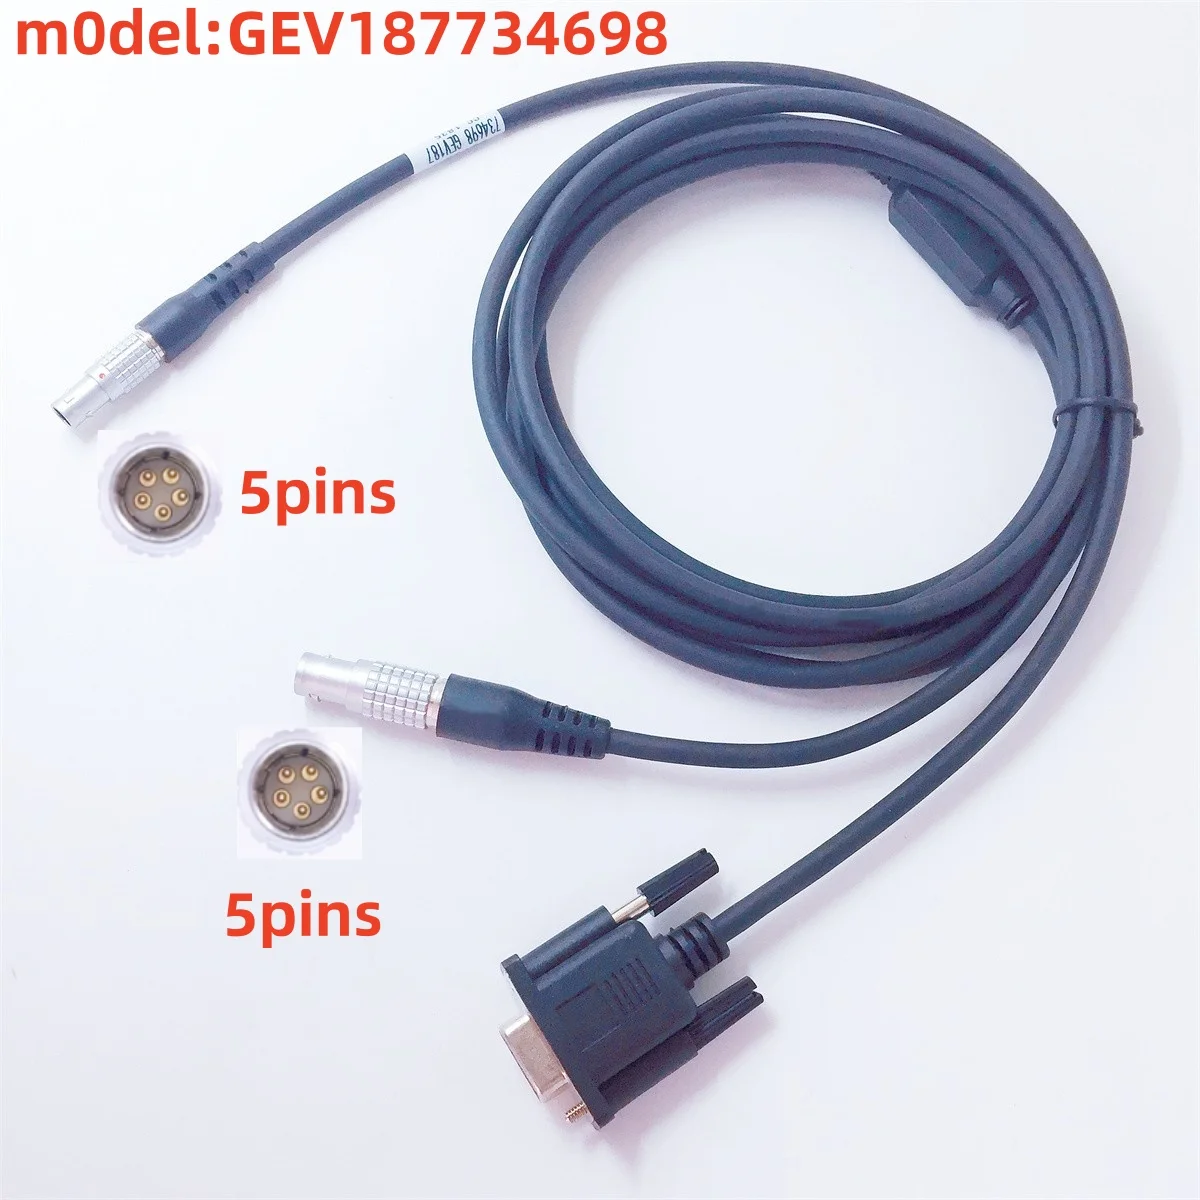 

Brand new Y-type cable GEV187 734698 connects Leica total station to PC and GEB70 GEB171 GEB371 battery cable